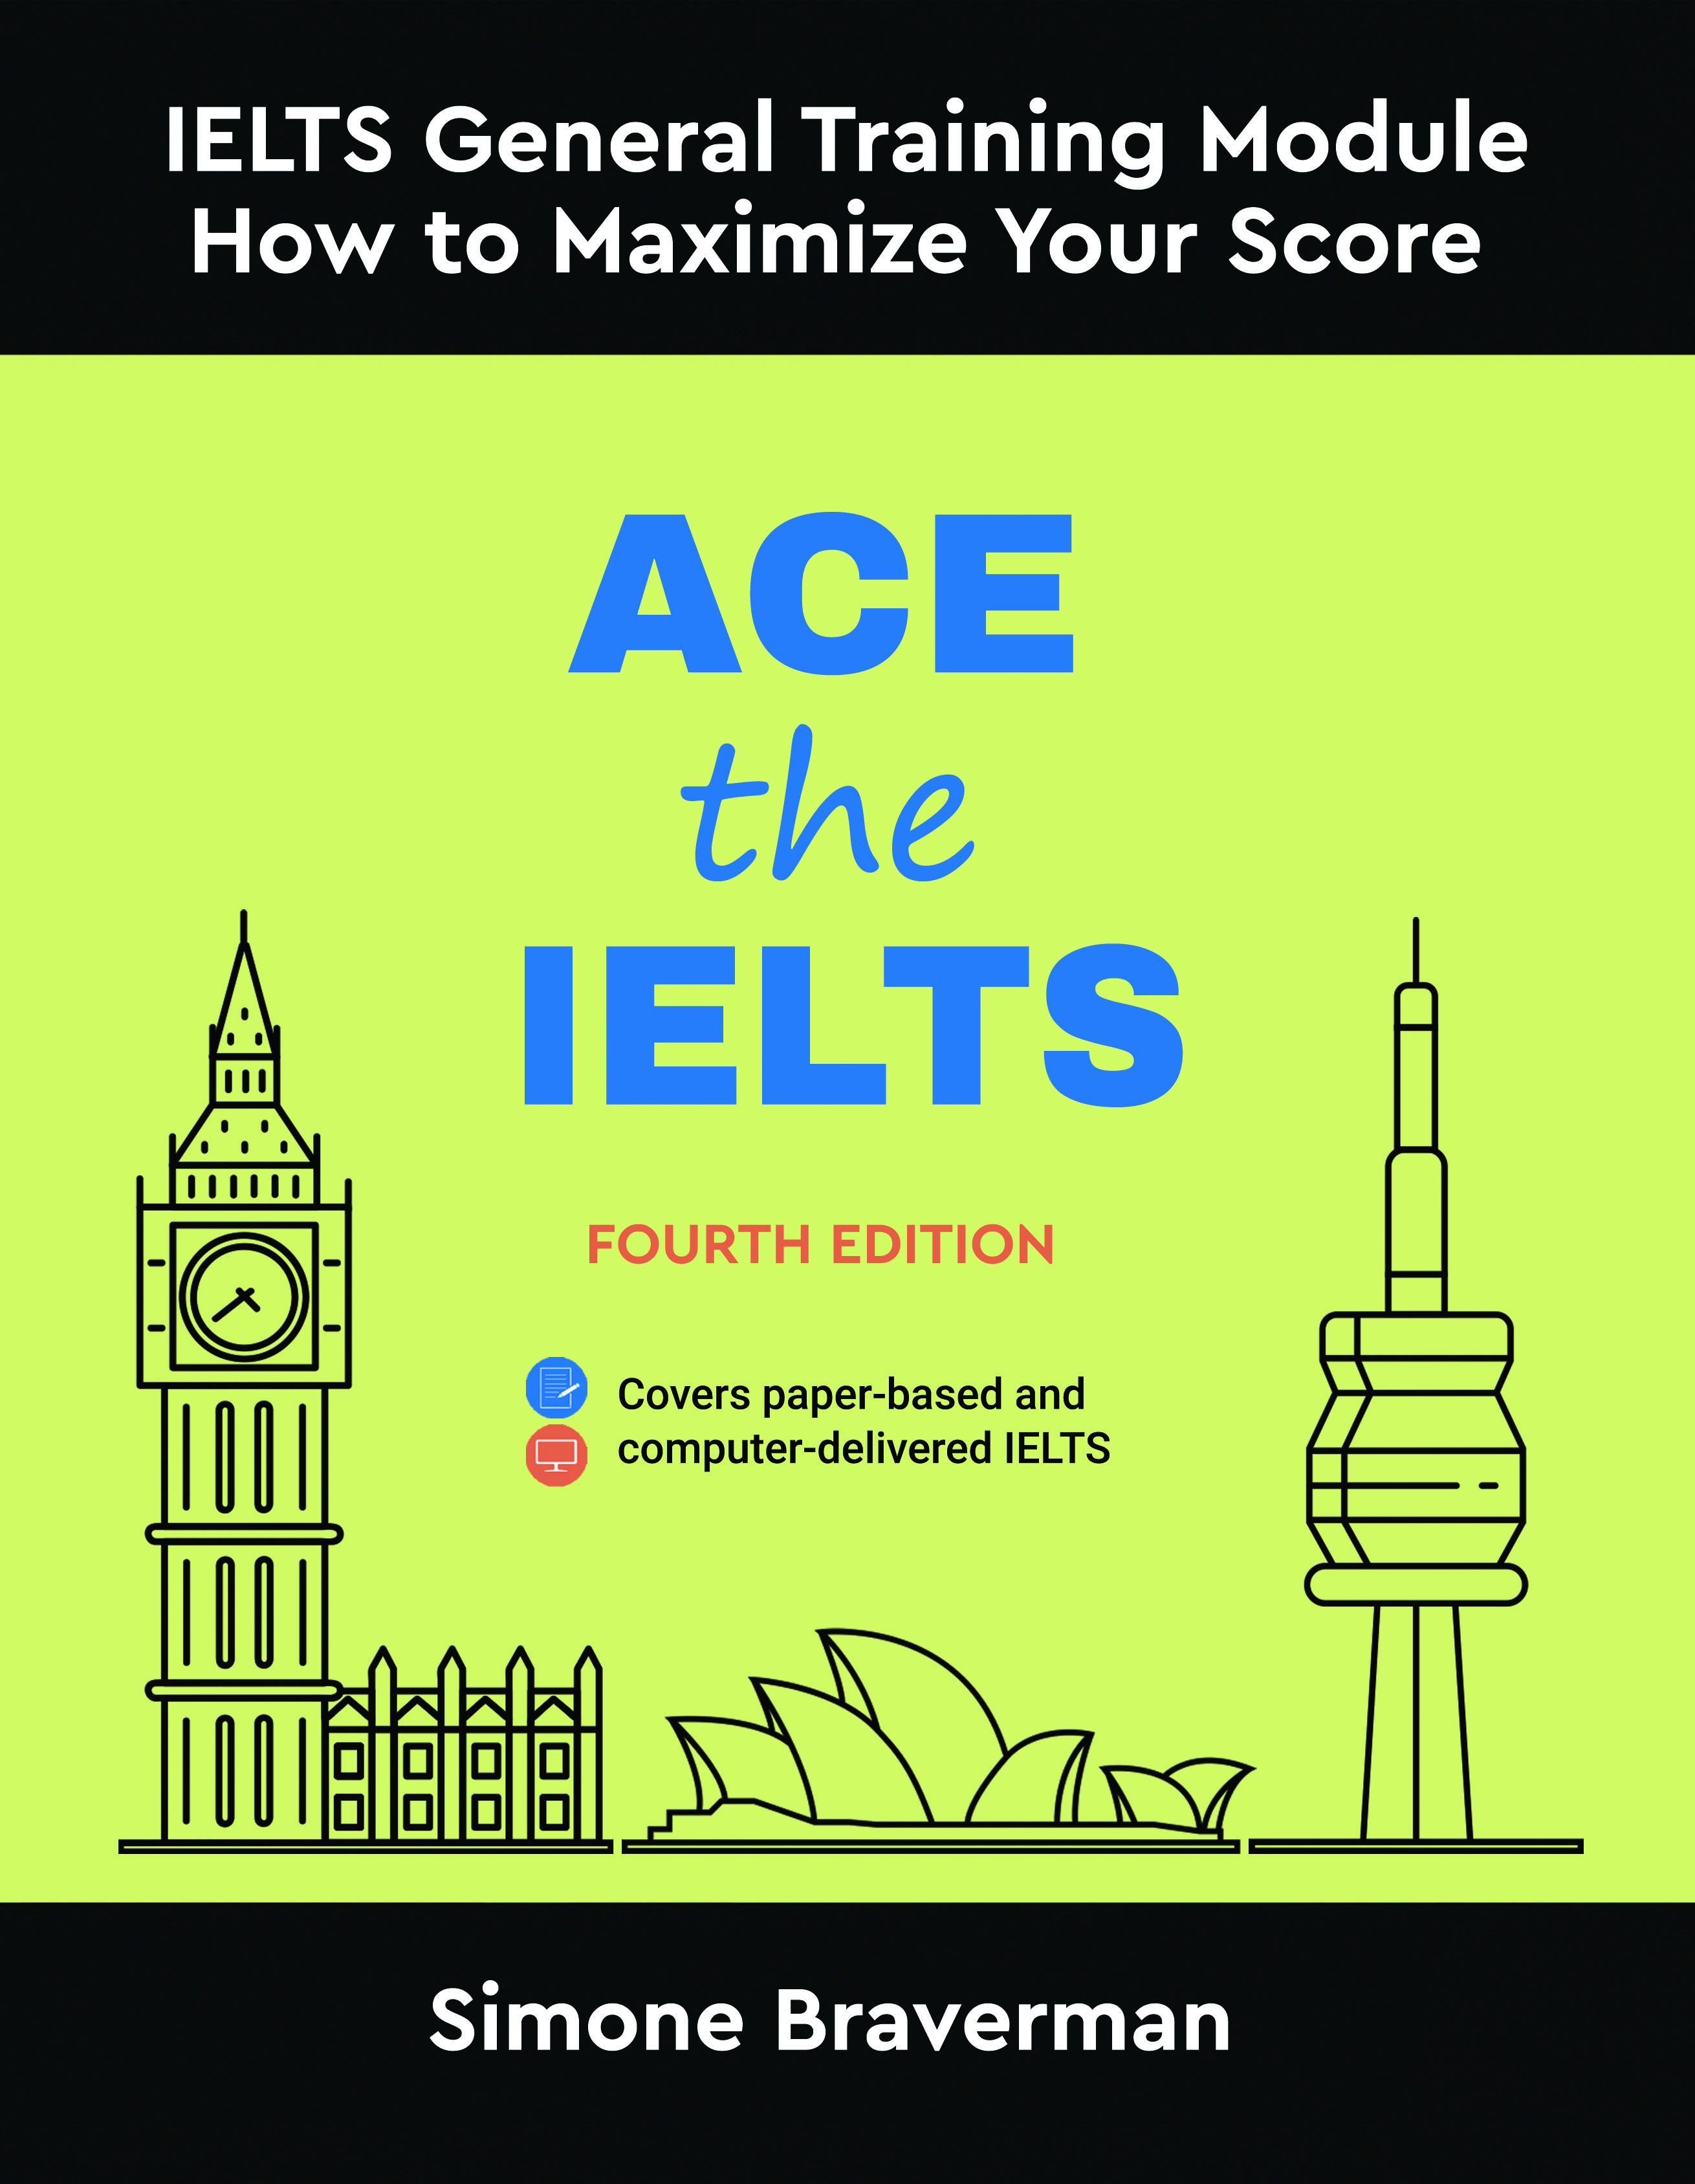 Ace the IELTS book, your guide to a higher score in IELTS